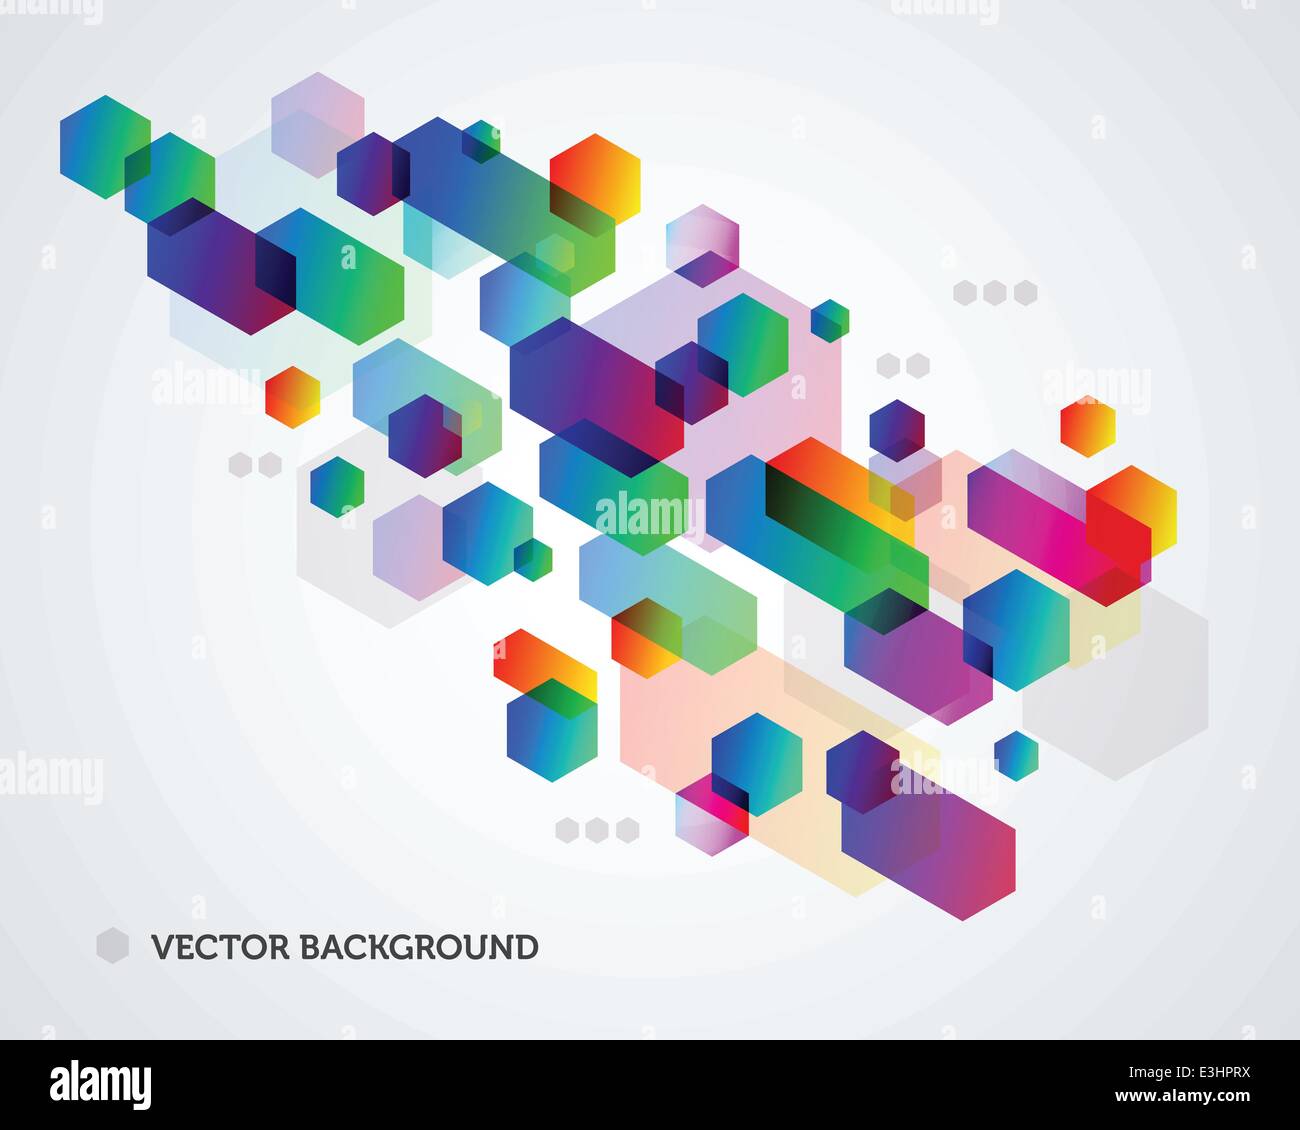 Colorful abstract background design composed of vector shapes Stock Vector